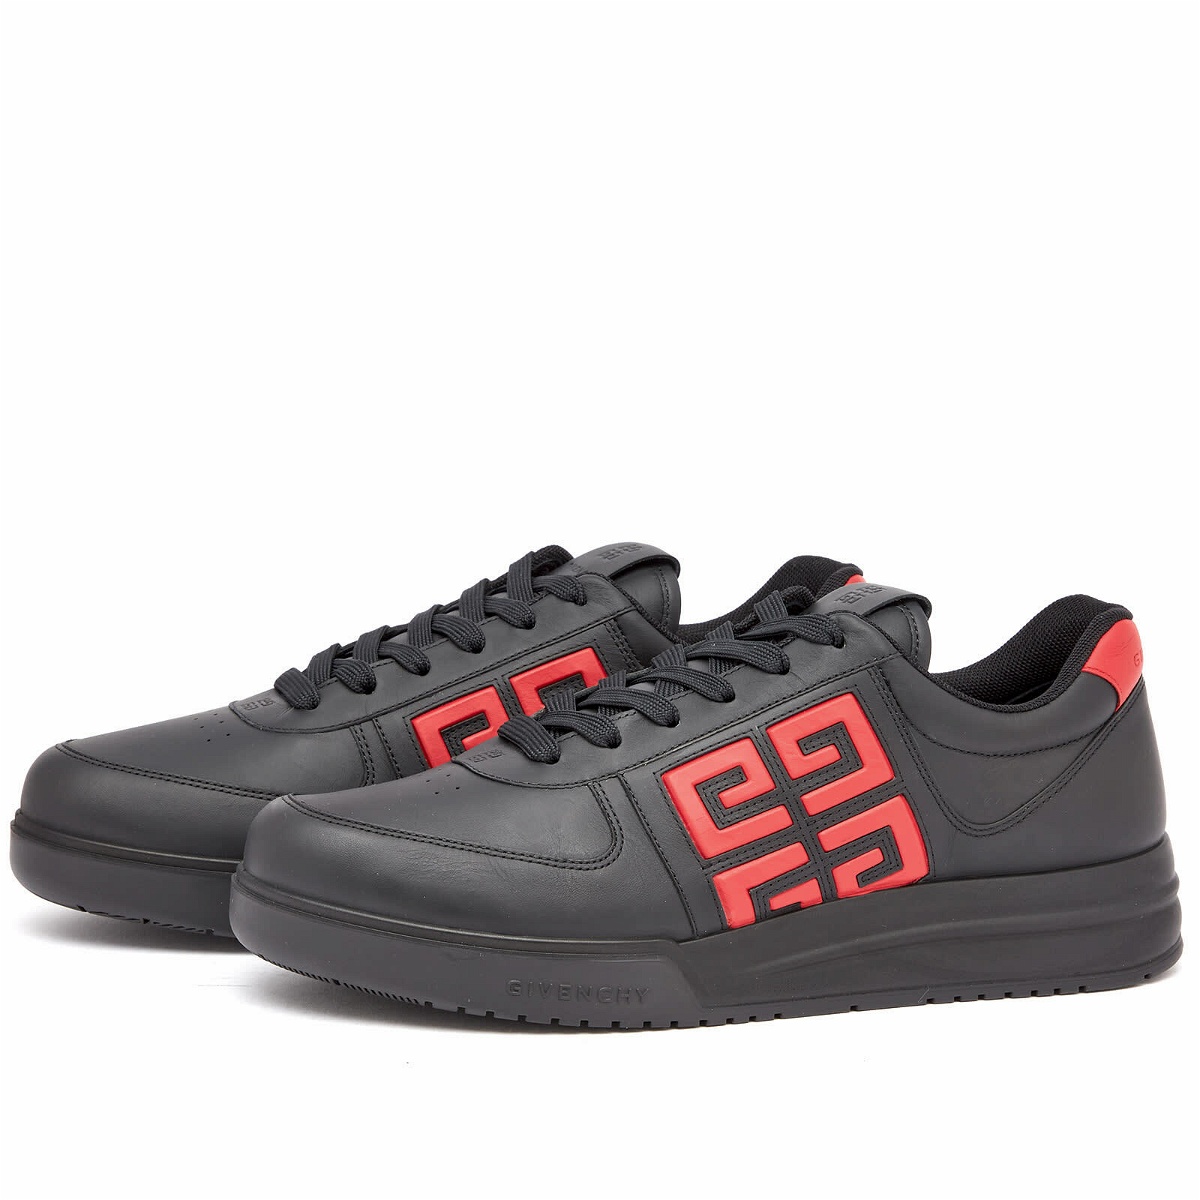 Photo: Givenchy Men's G4 Low Top Sneakers in Black/Red